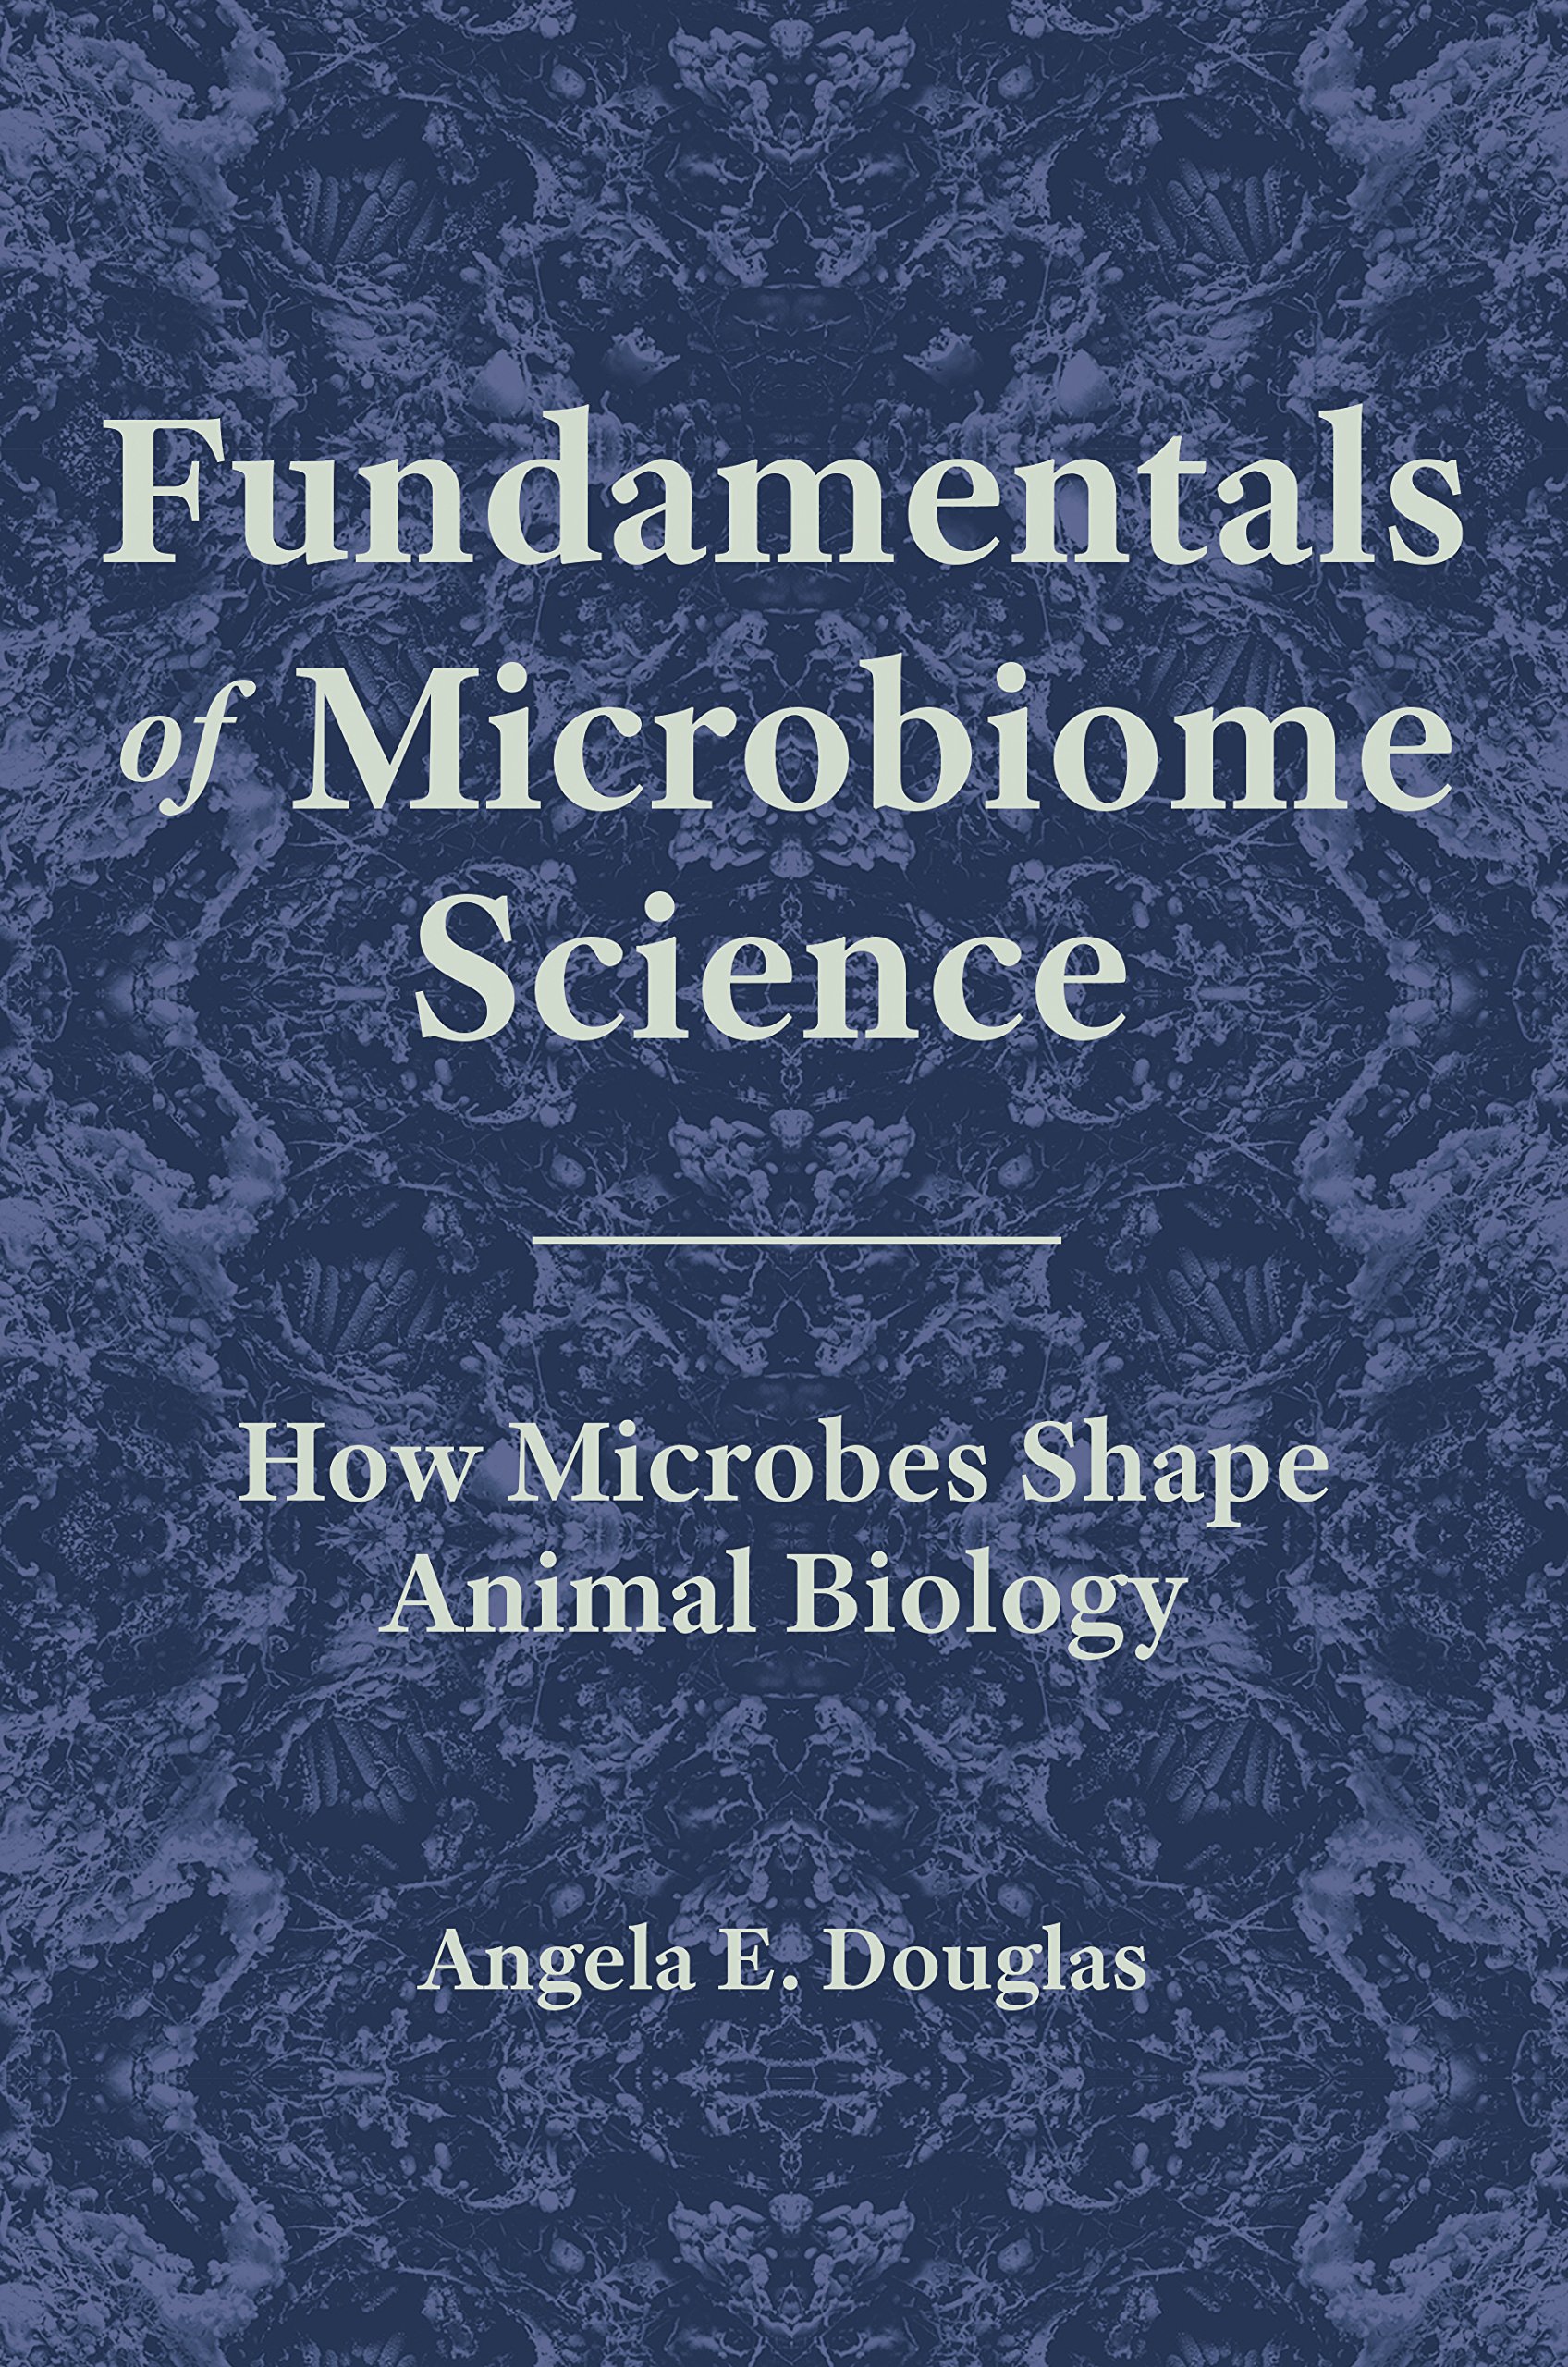 Fundamentals of Microbiome Science